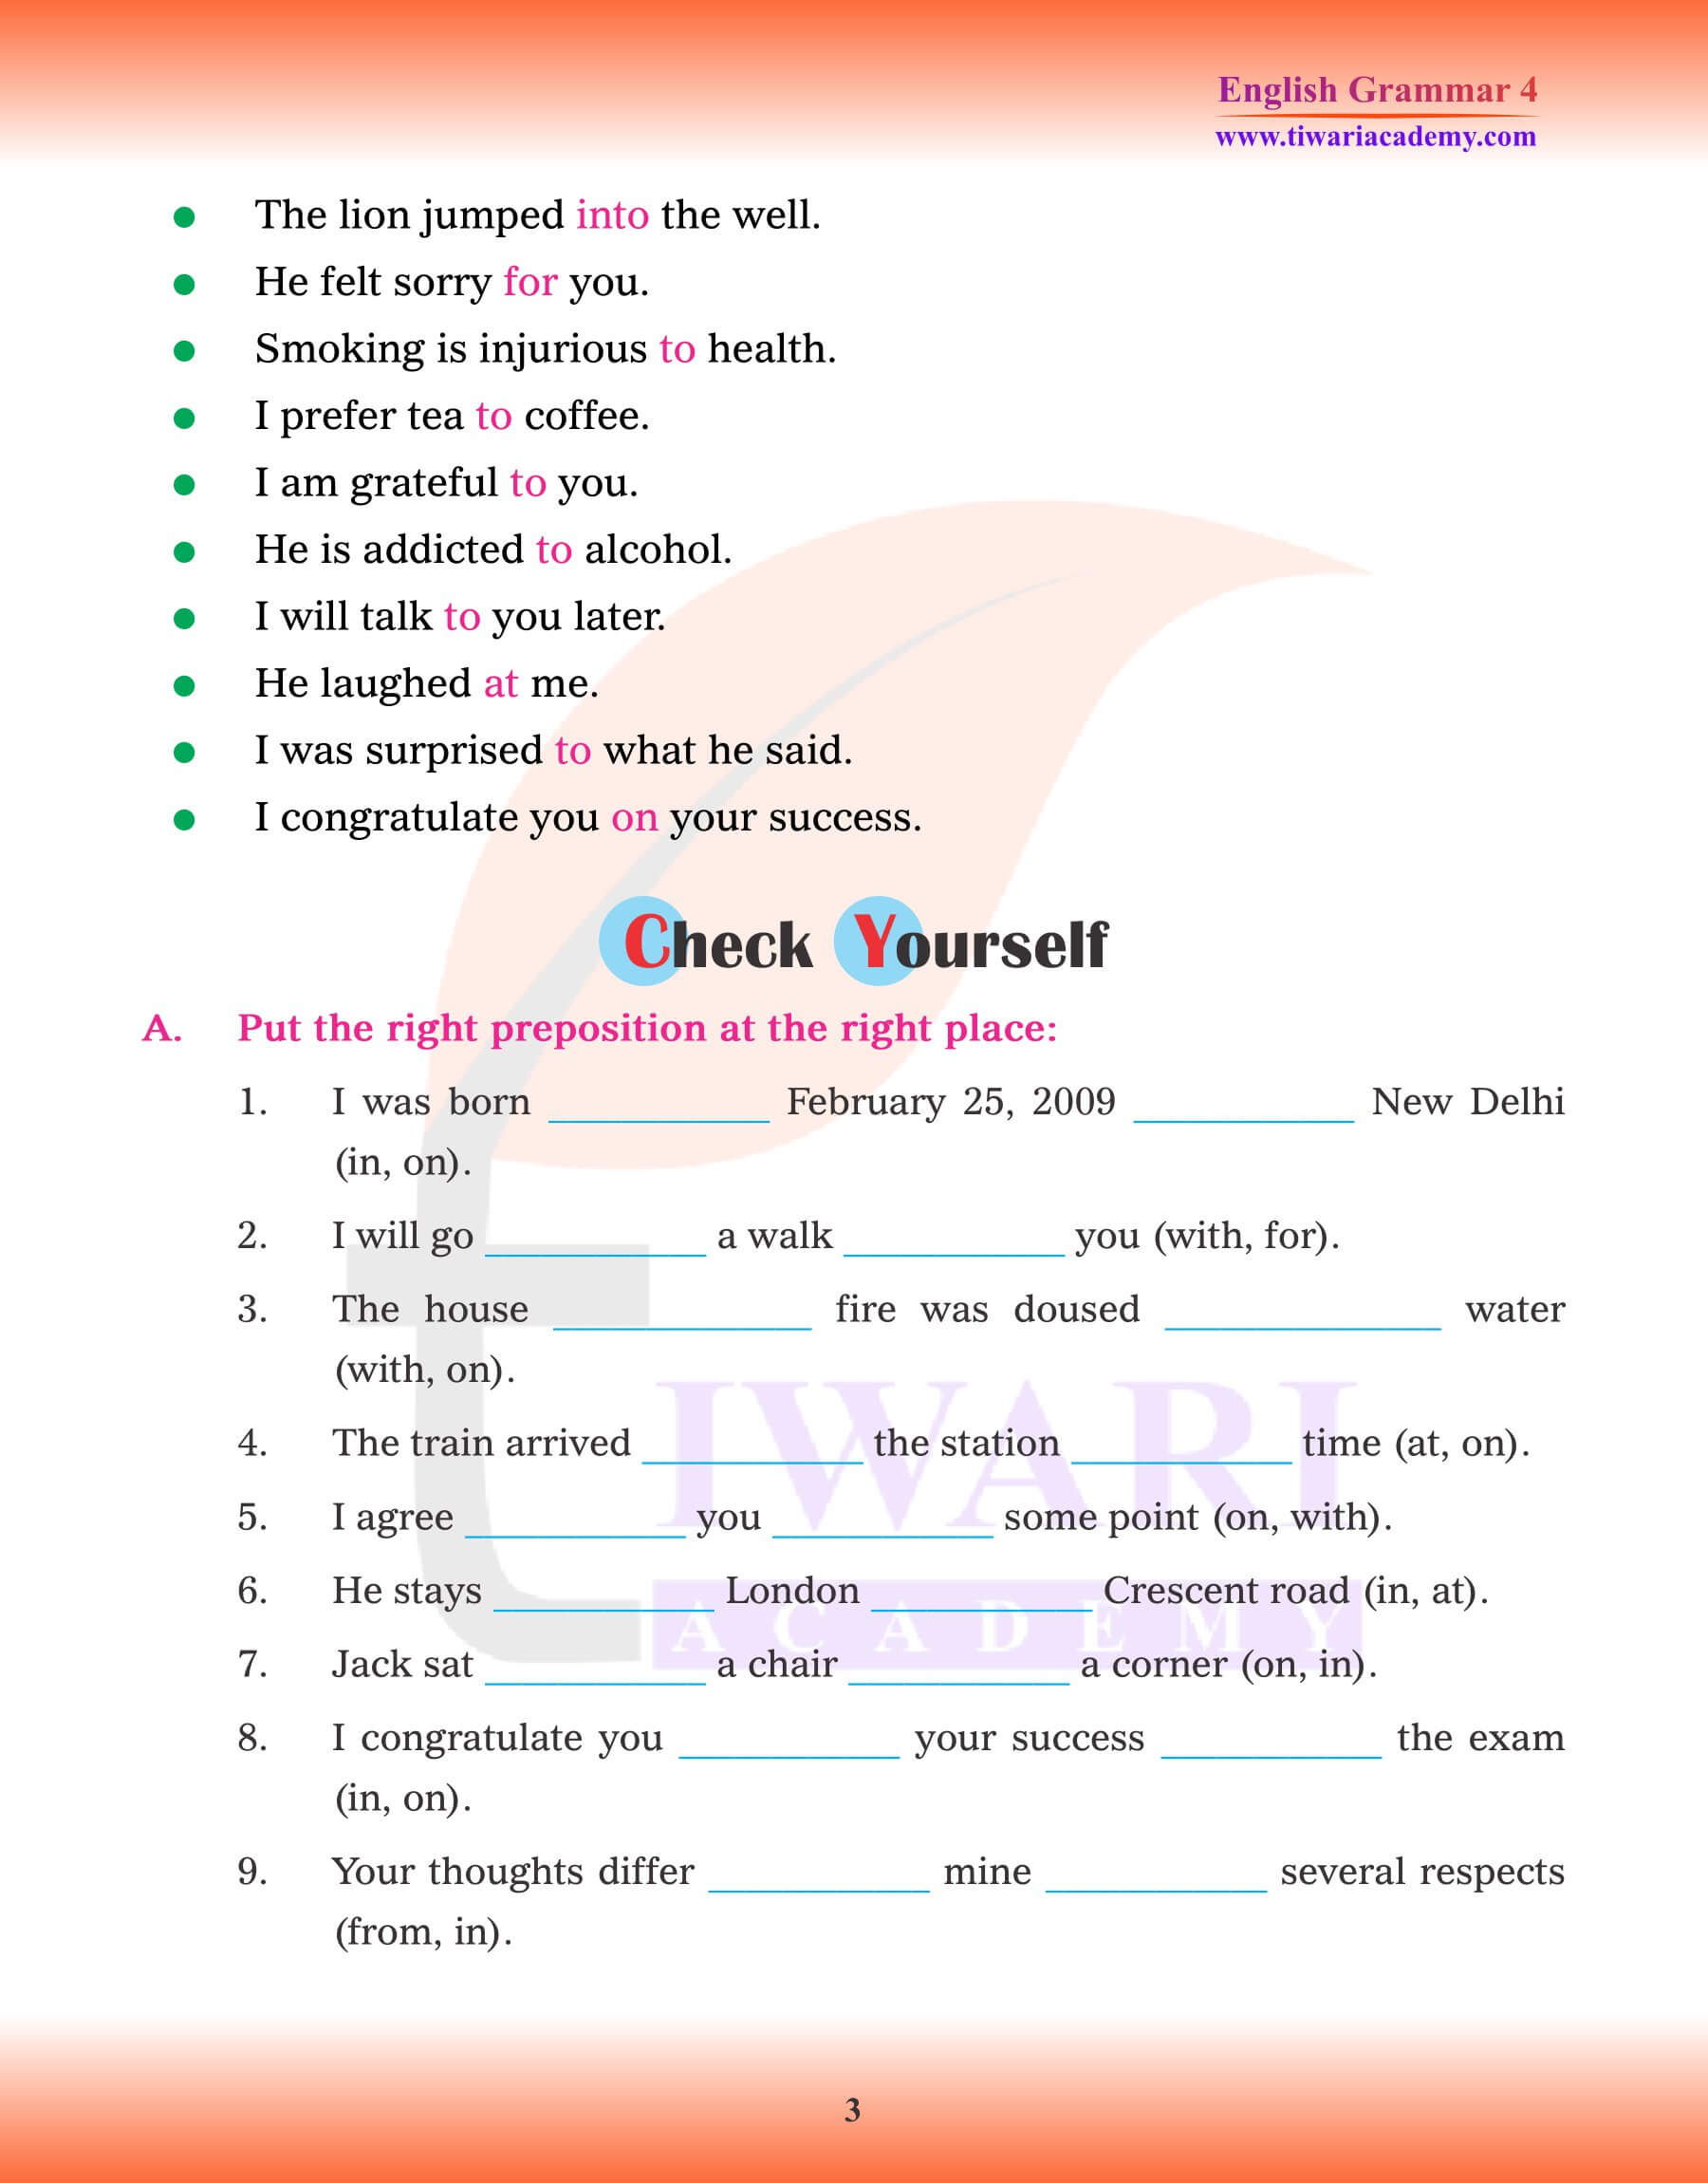 Class 4 English Grammar Chapter 14 Prepositions Exercises